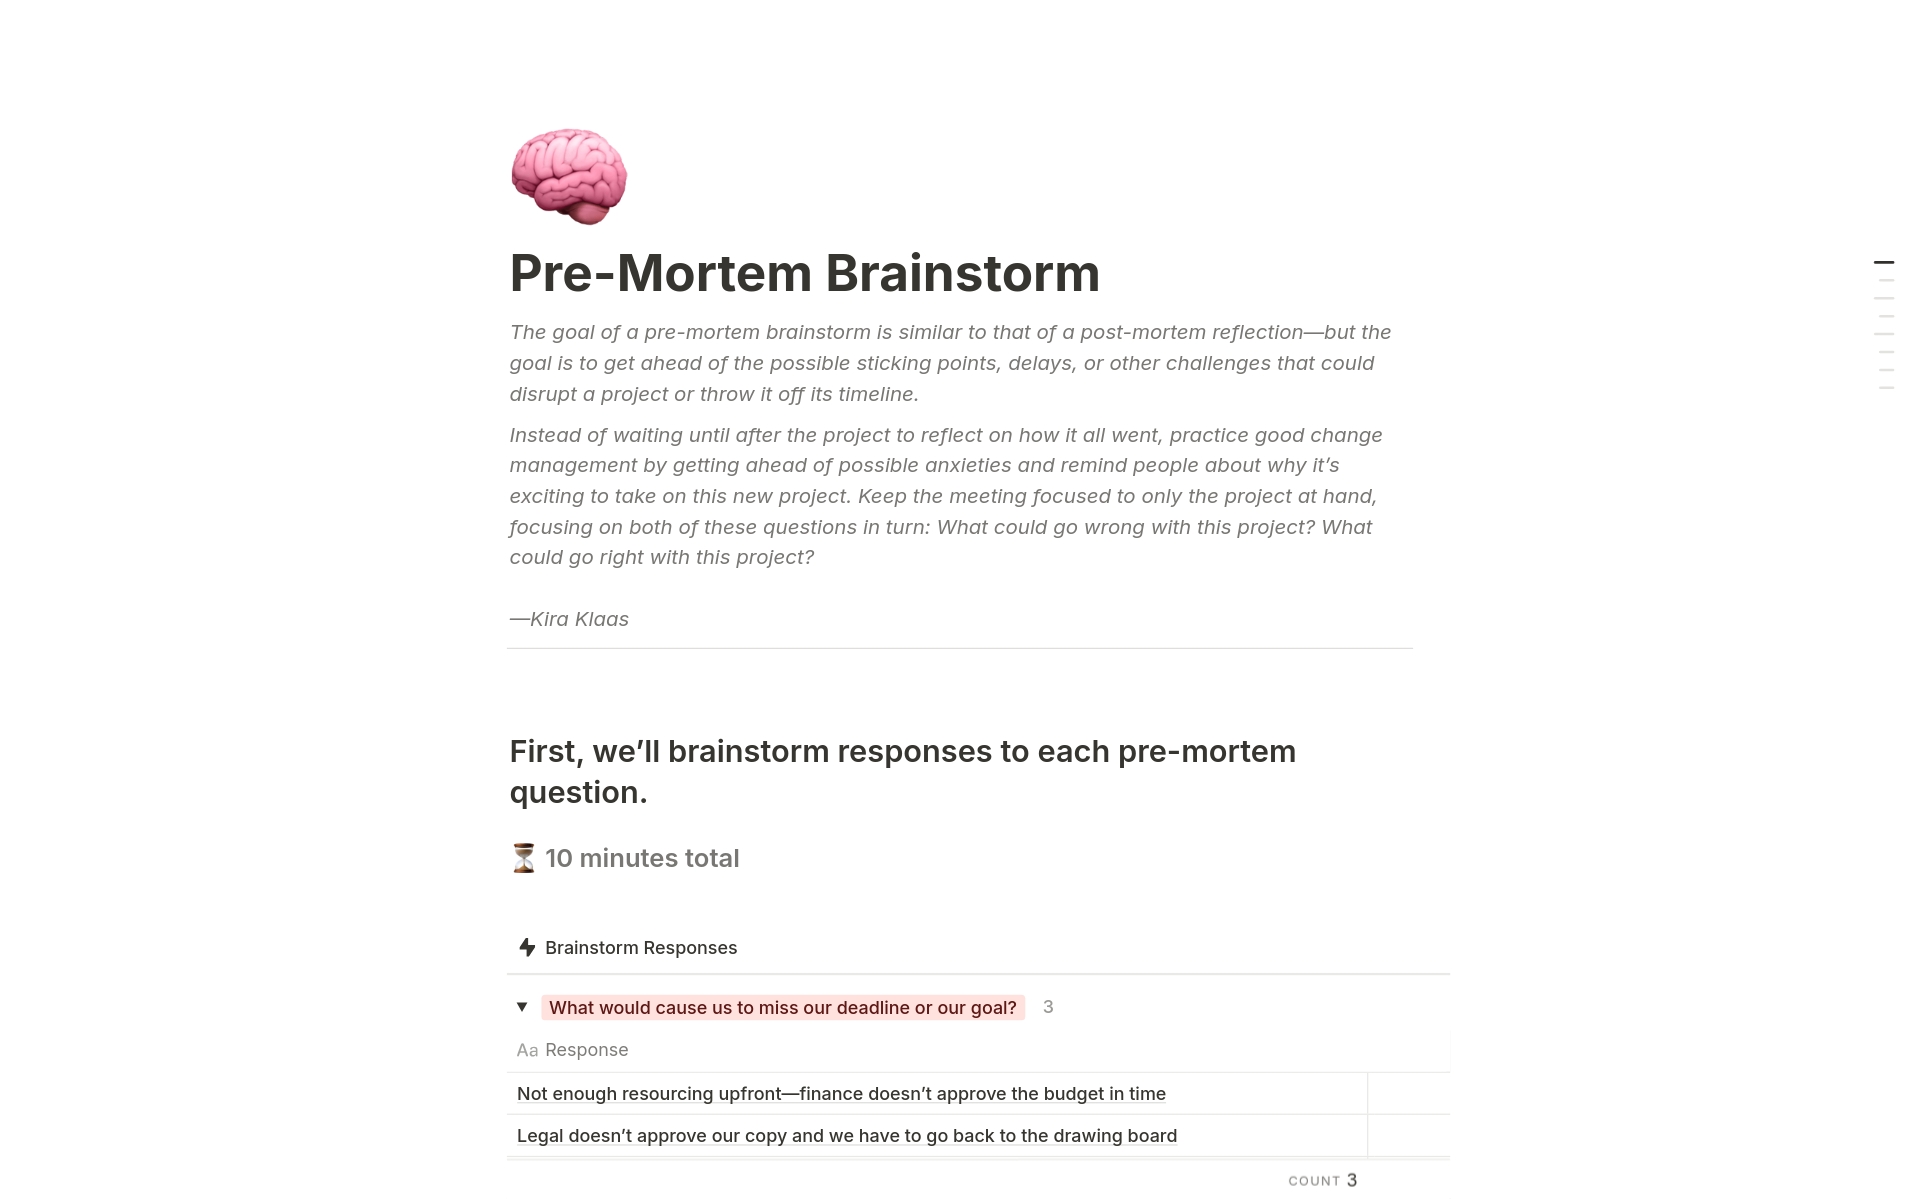 The goal of a pre-mortem brainstorm is like a post-mortem reflection—but the goal is to get ahead of the possible sticking points, delays, or other challenges that could disrupt a project or throw it off its timeline. I used this at Notion at the start of every campaign.